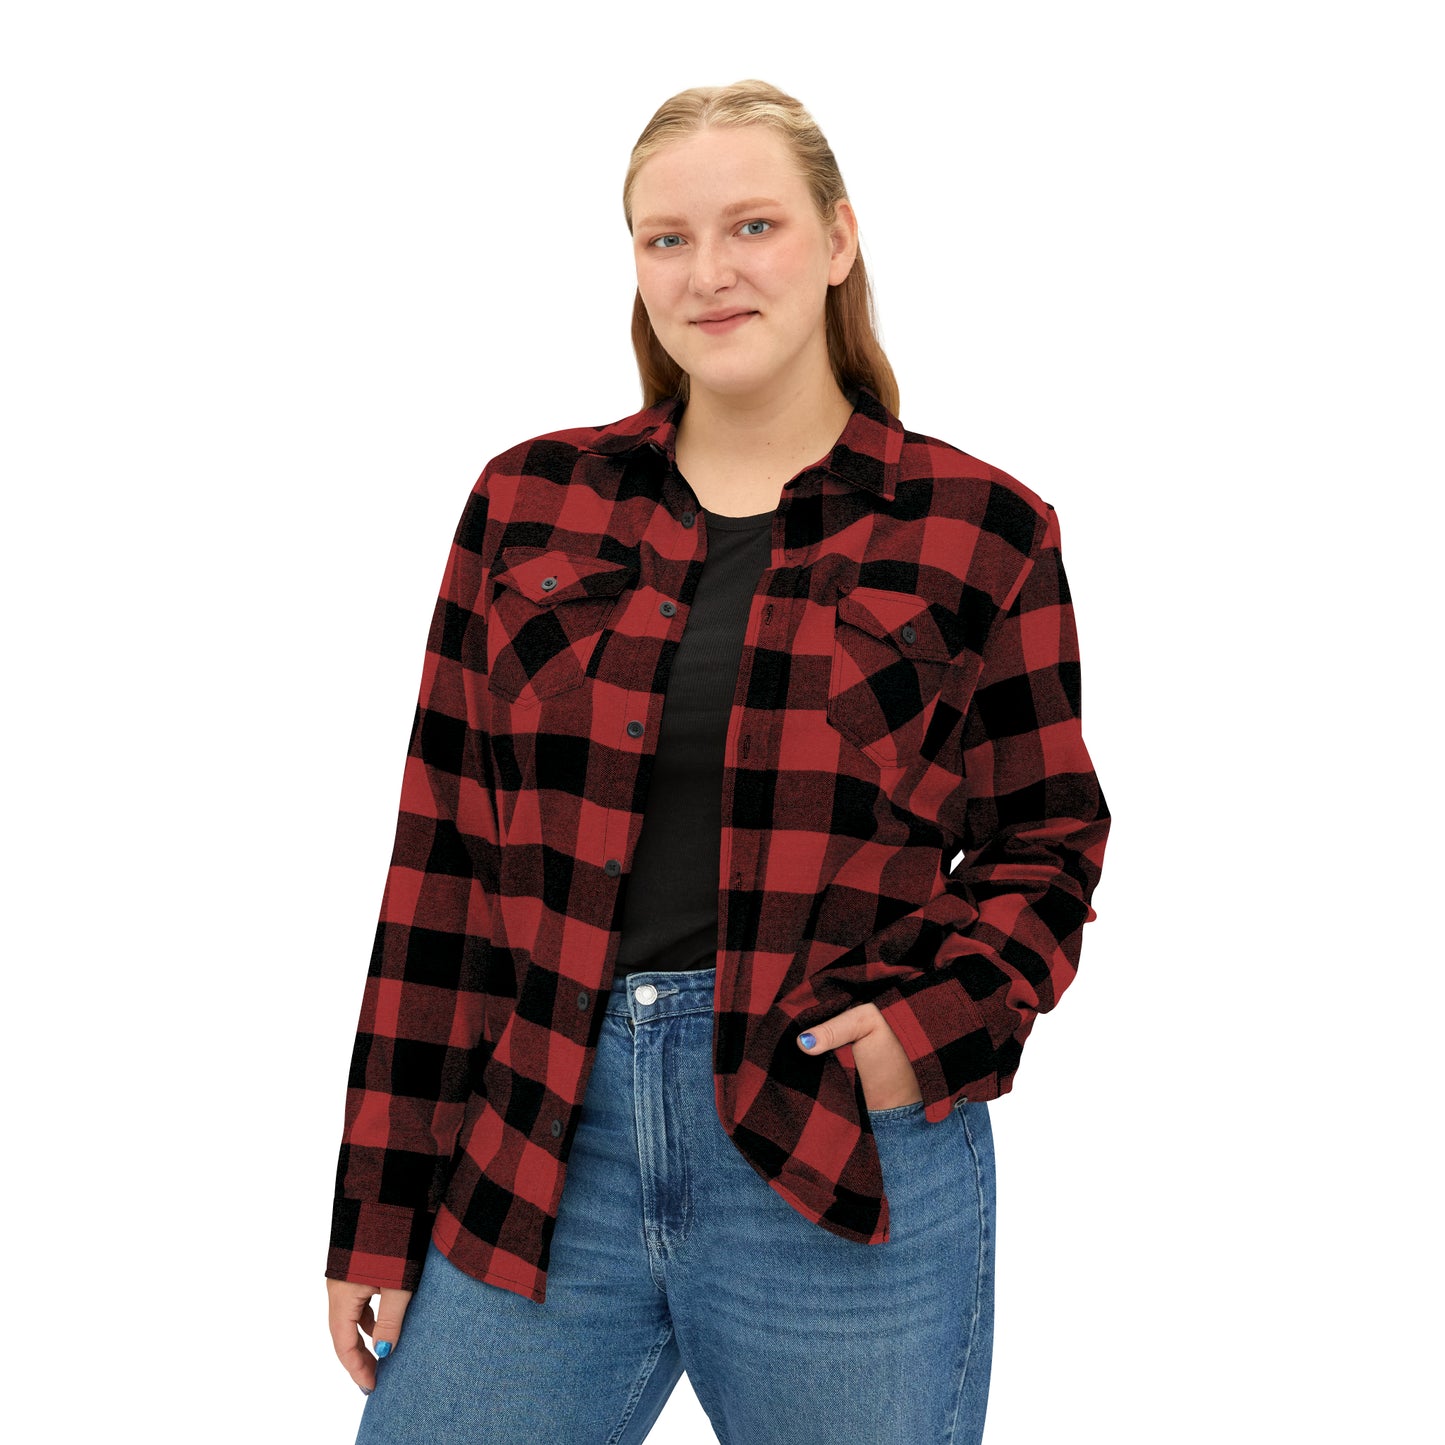 A woman wearing a Printify unisex red and black flannel shirt.